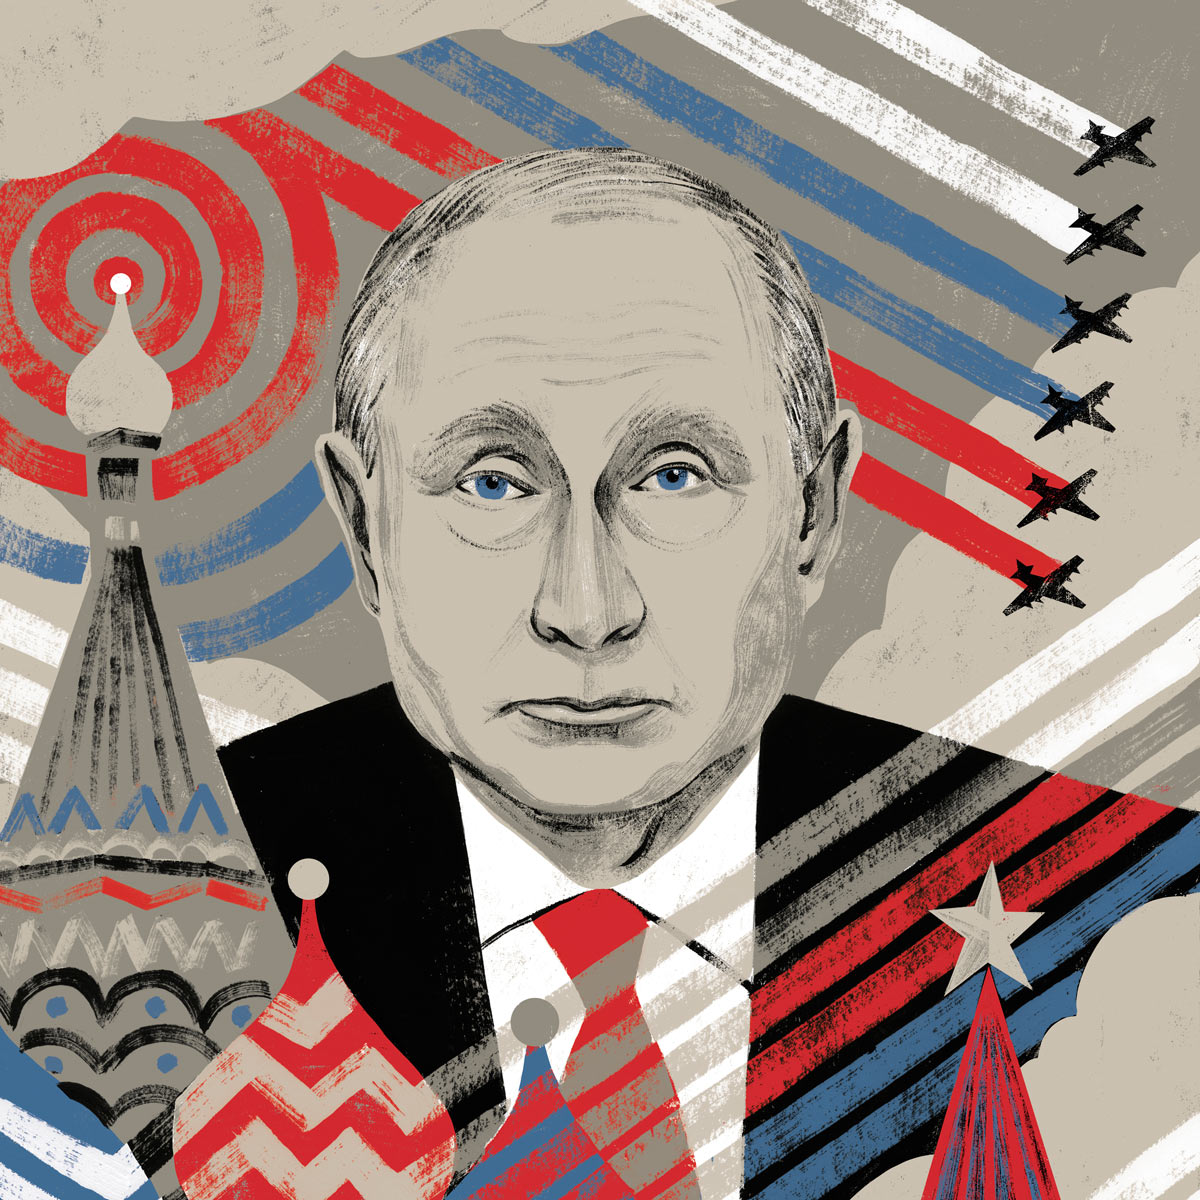 Vladimir Putin's war of fog: How the Russian President used deceit, propaganda and violence to reshape global politics - The Globe and Mail